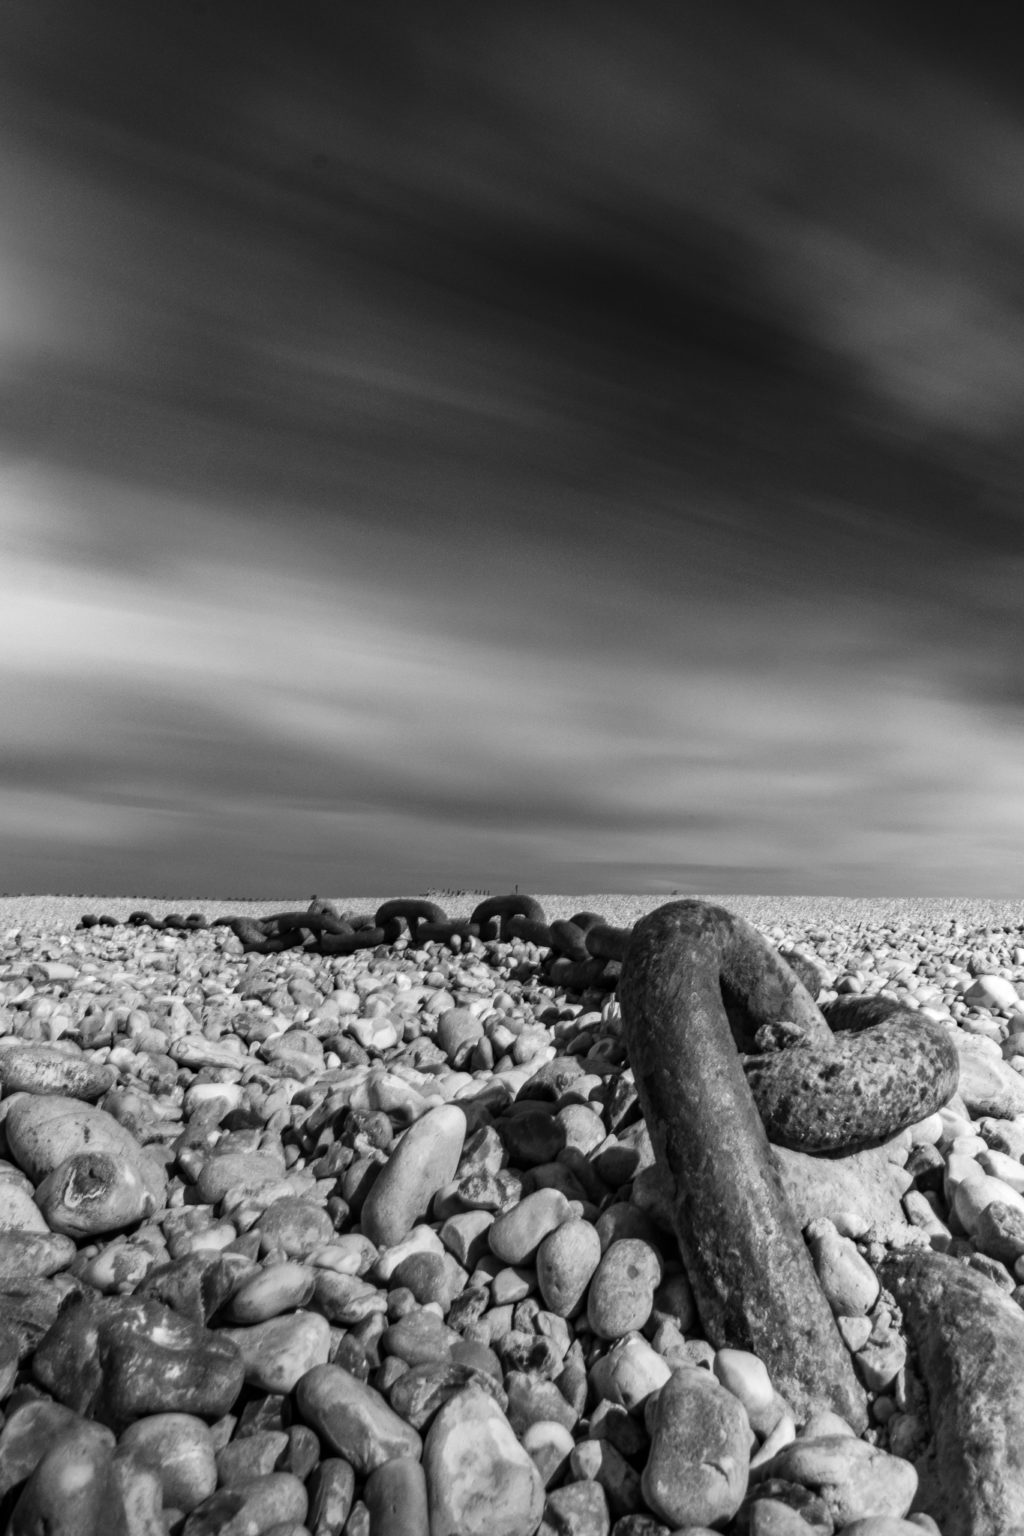 Long exposure image of chains on a stone beach images tell story